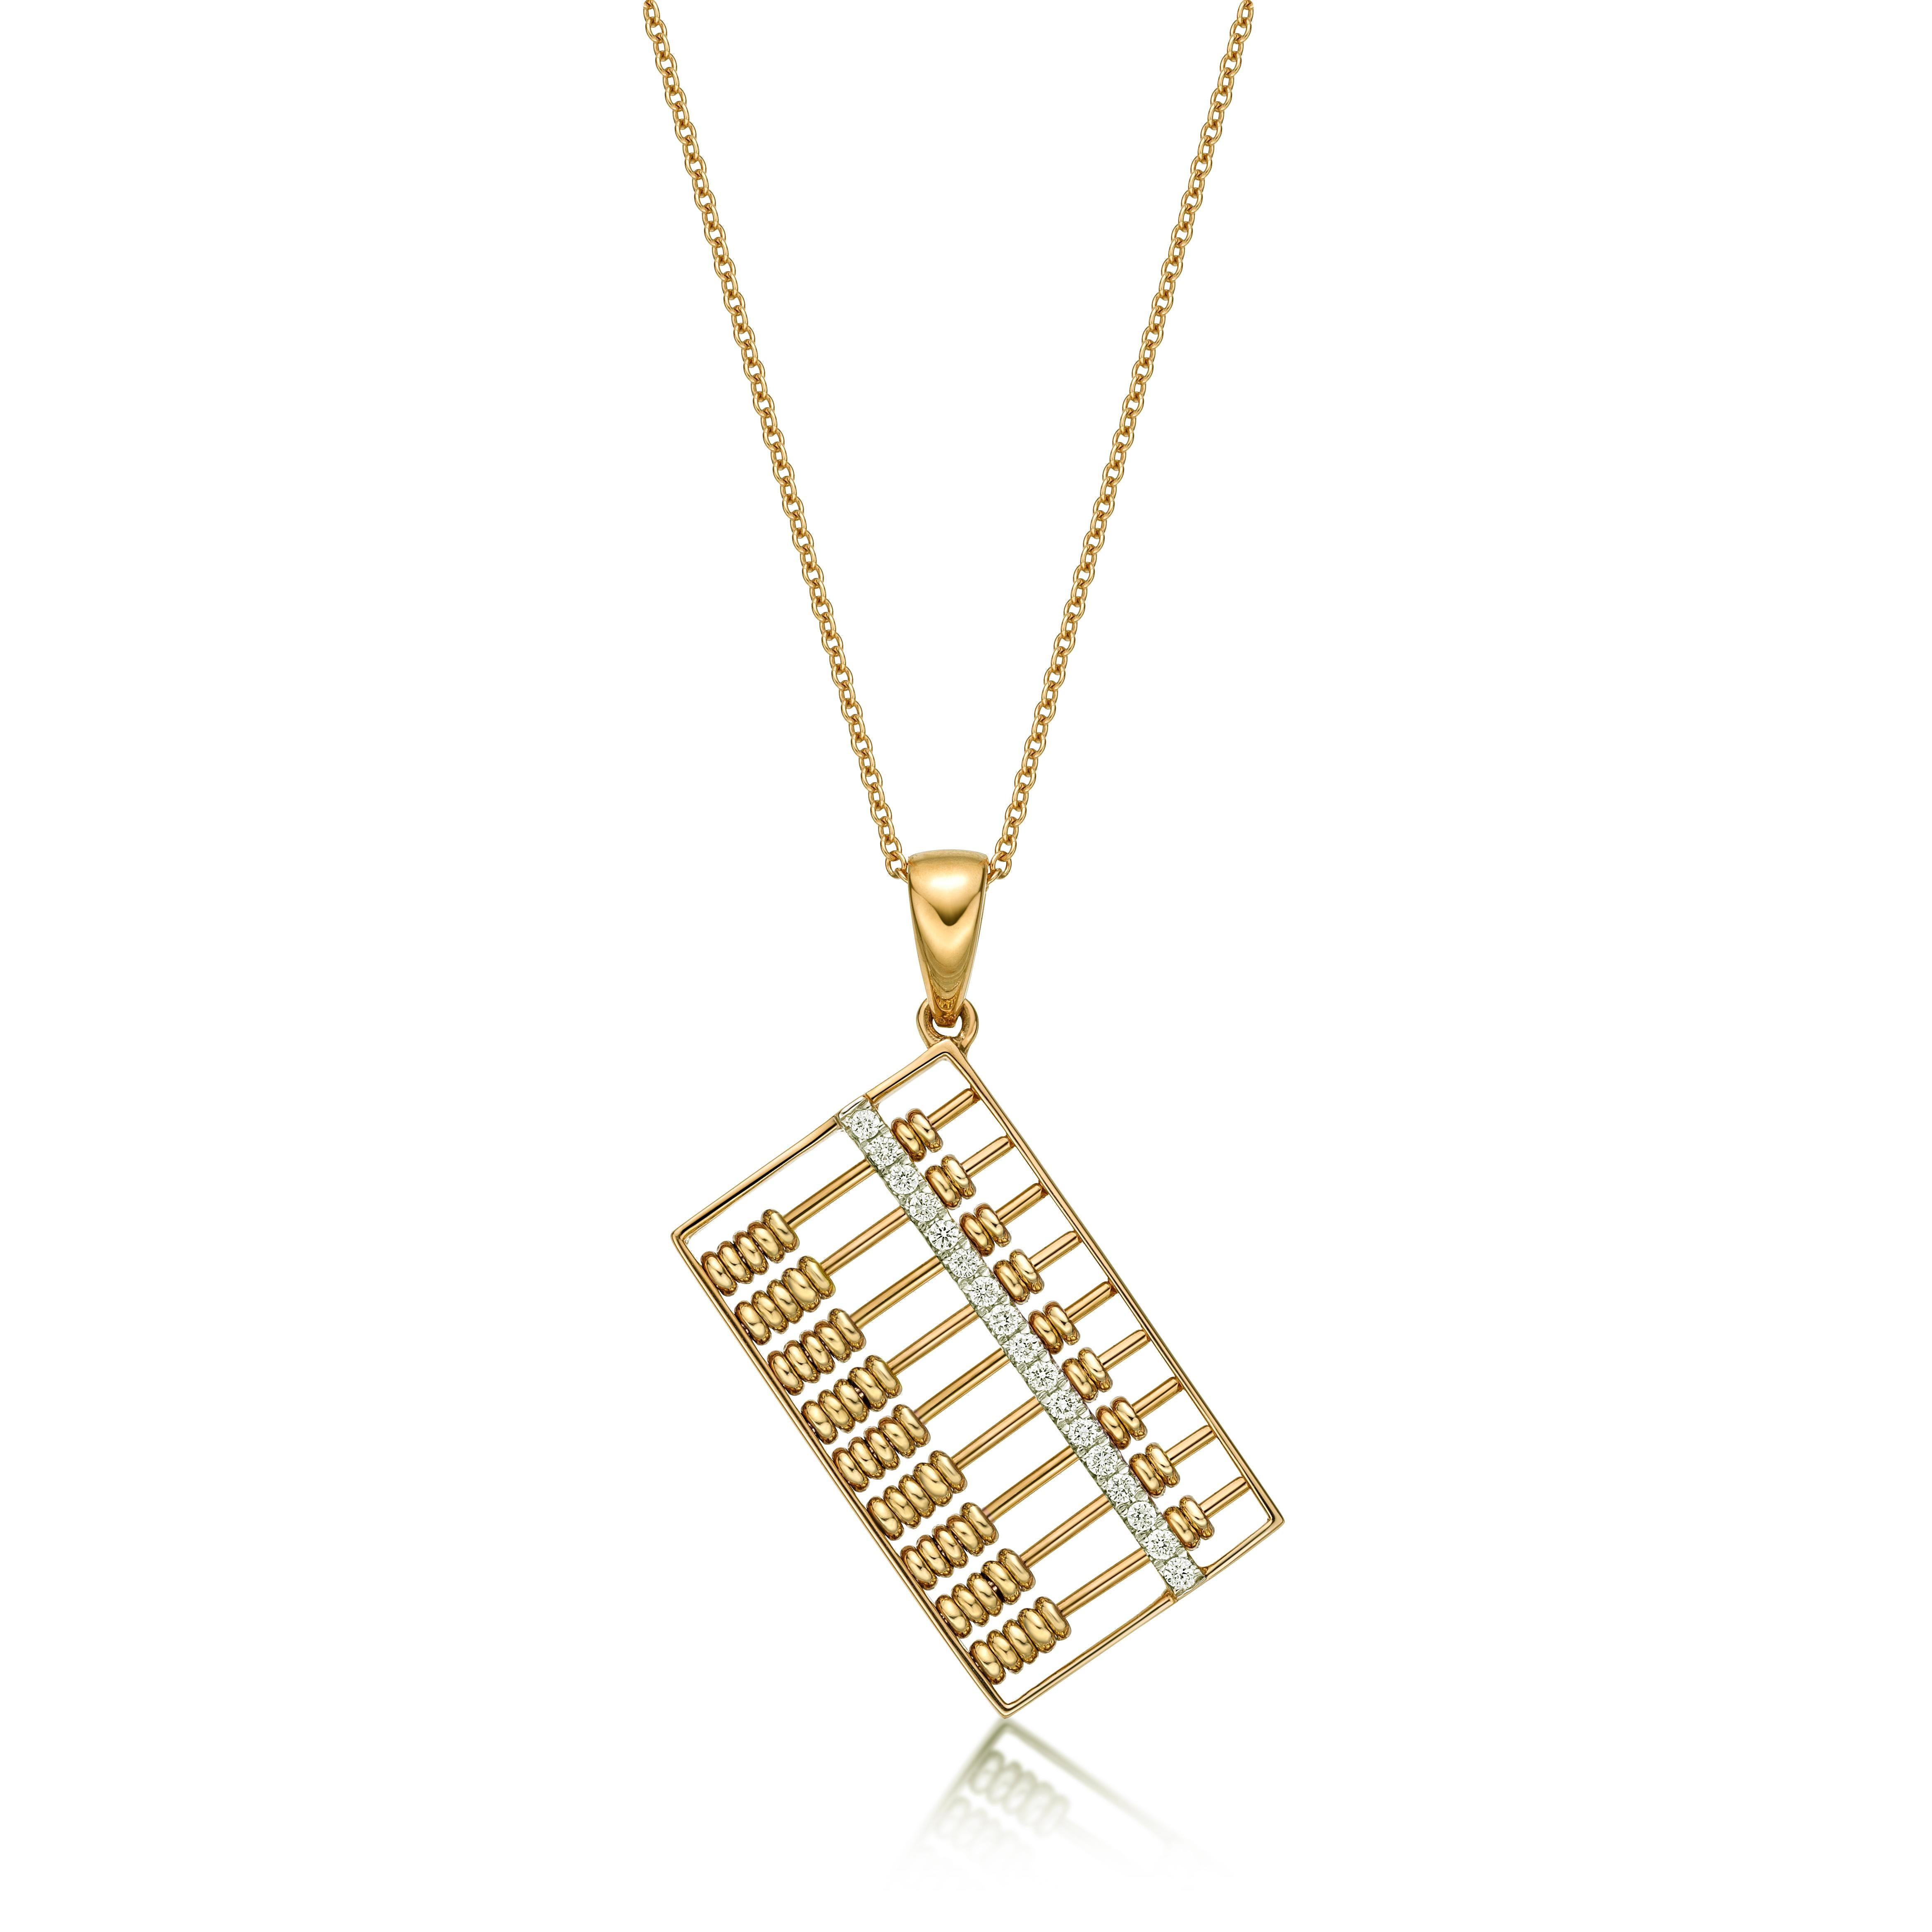 Abacus pendant with moving beads, set with diamonds weighing 0.29 carats, mounted in 18 karat gold, available in different colours (yellow gold, white gold and rose gold)
Abacus, invented in ancient China  more than 2,600 years ago, is a traditional